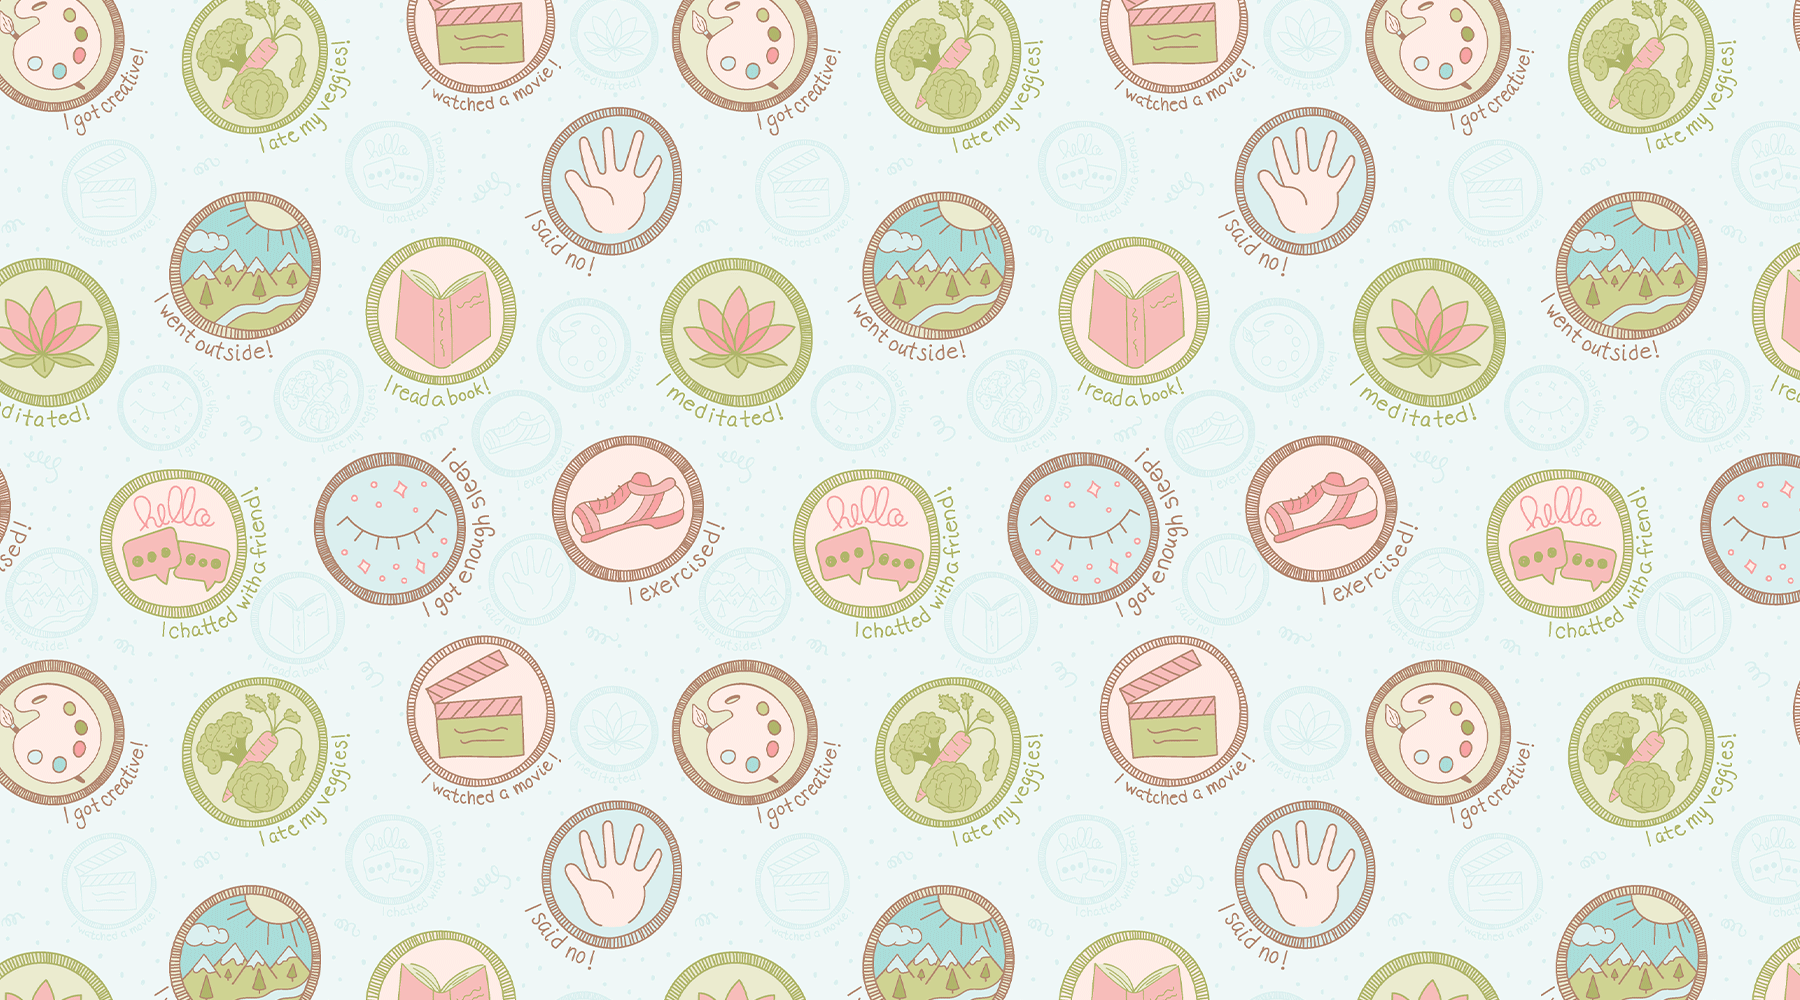 Self Care Badges Pattern | Surface Pattern Design | Ophiebug by Kelly Lollar